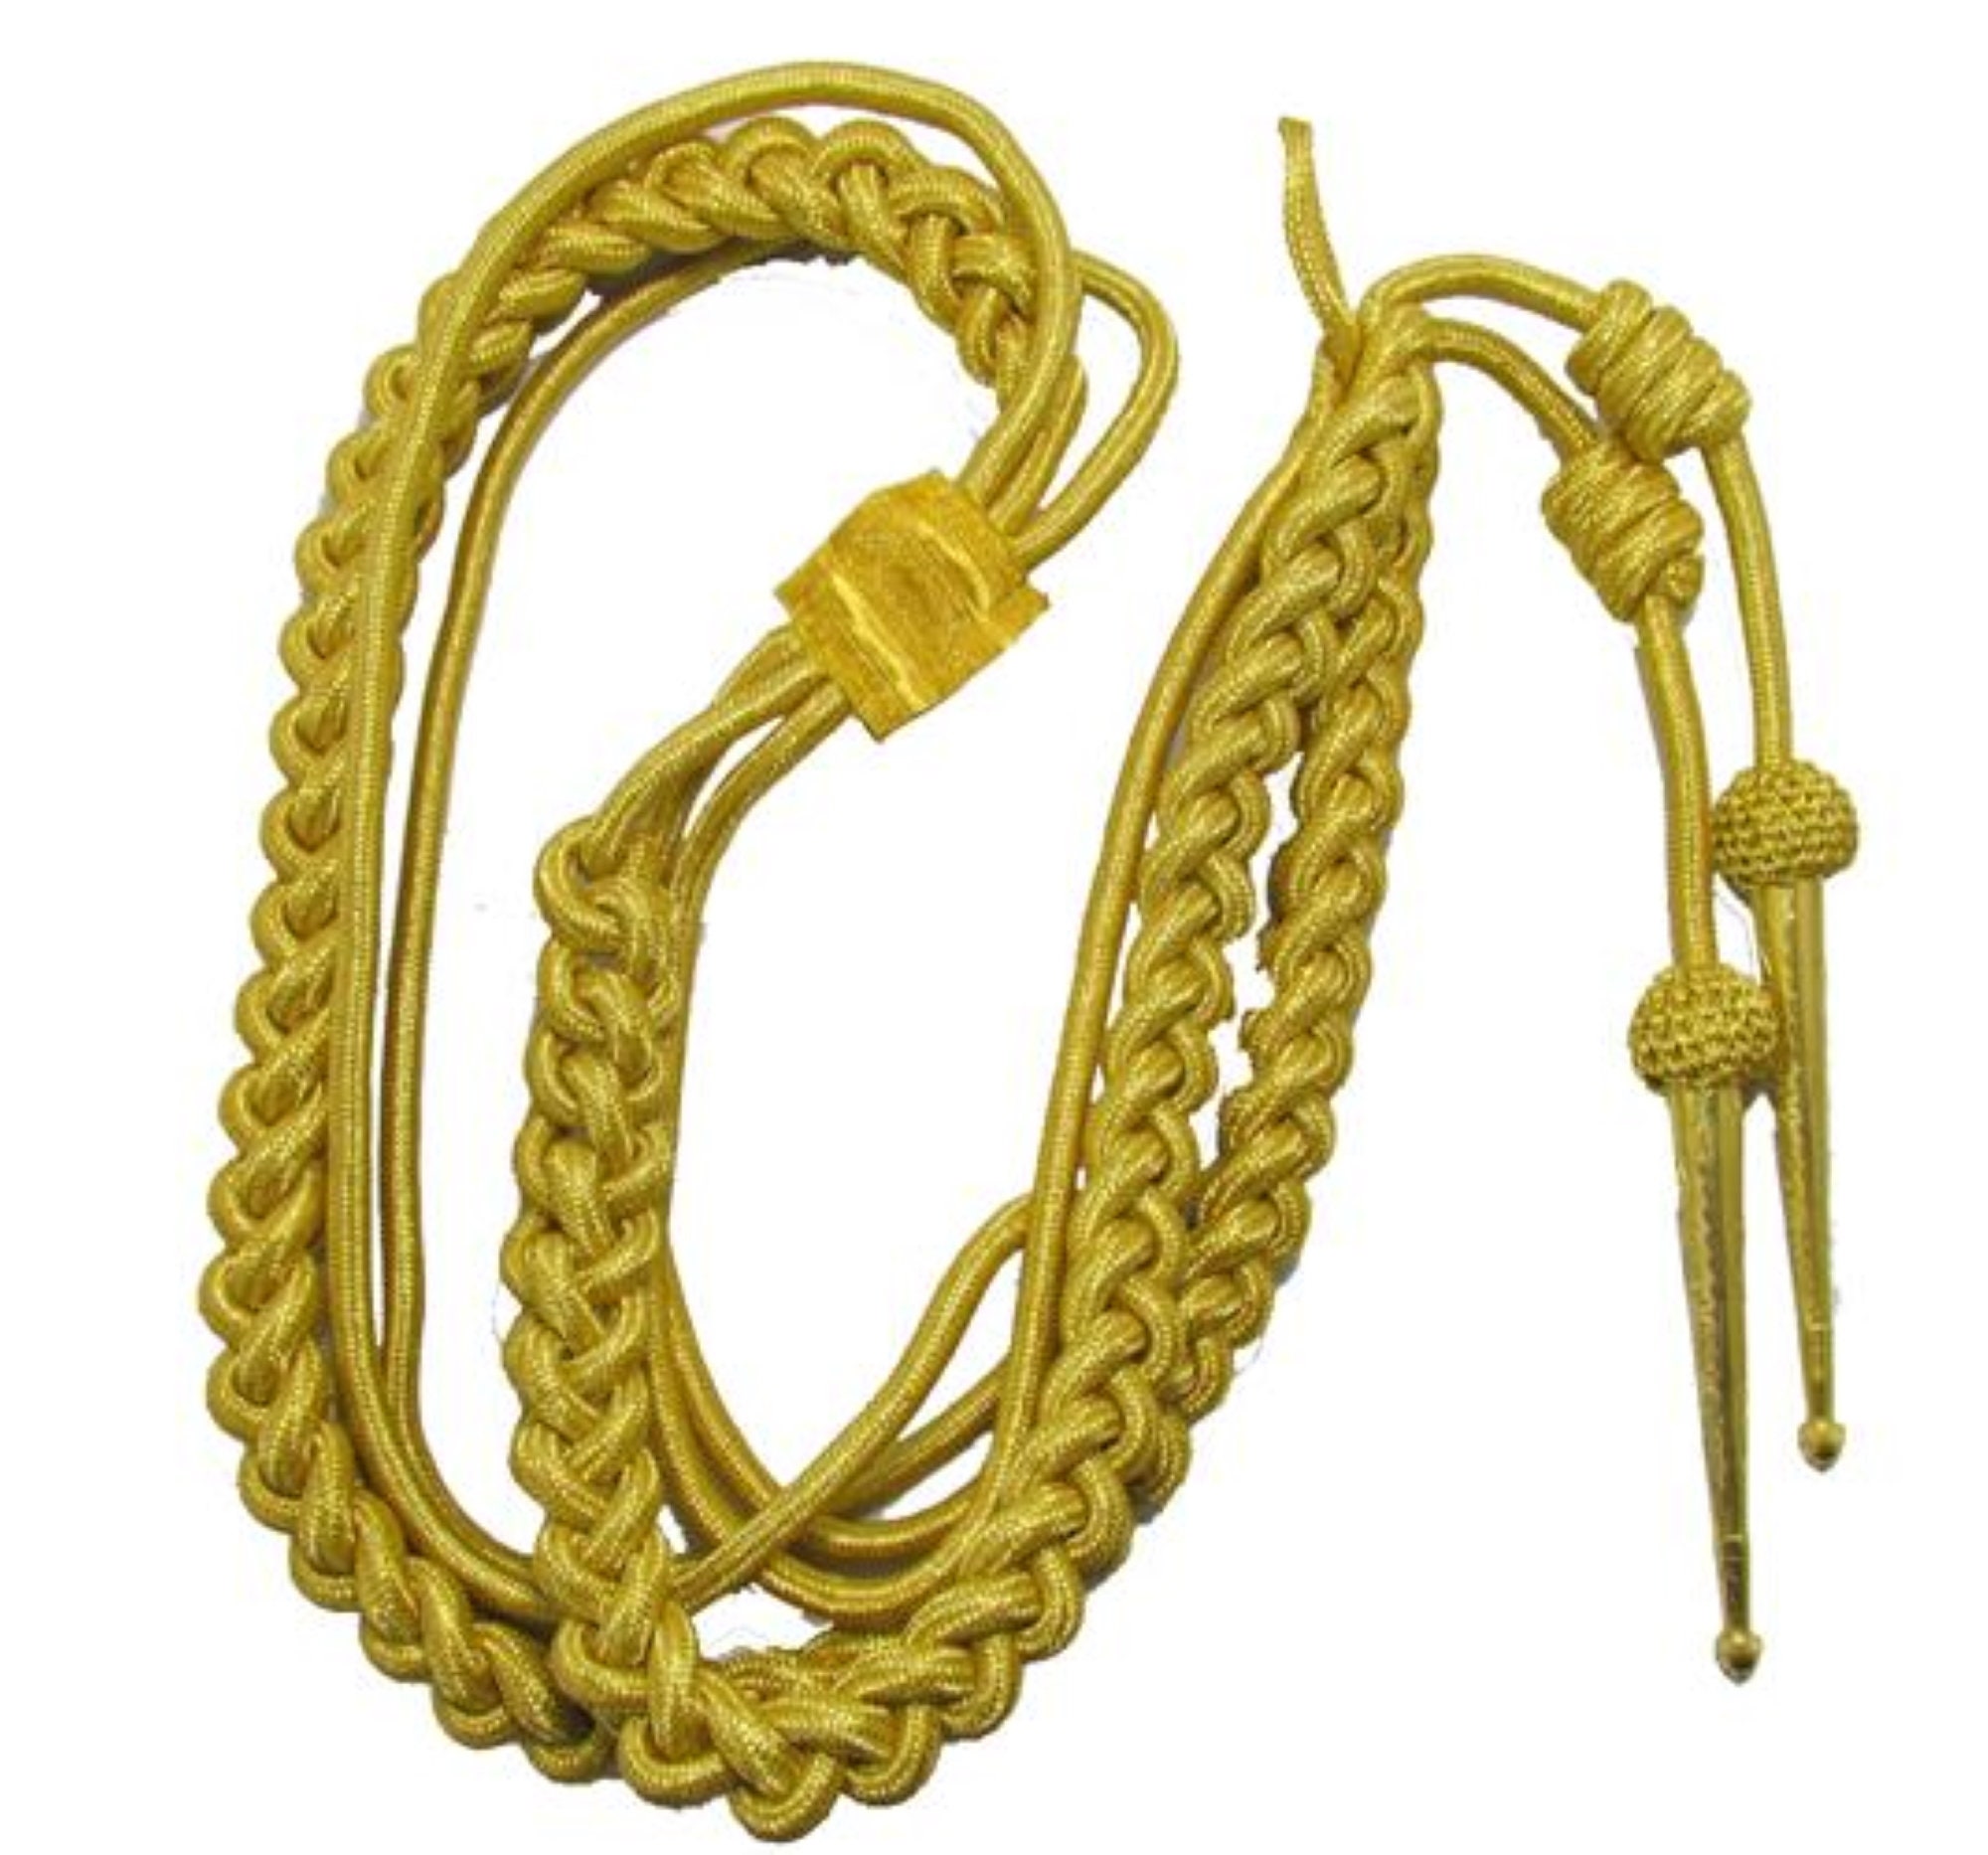 Aiguillette Gold Mylar Army Air Force Navy - Etsy